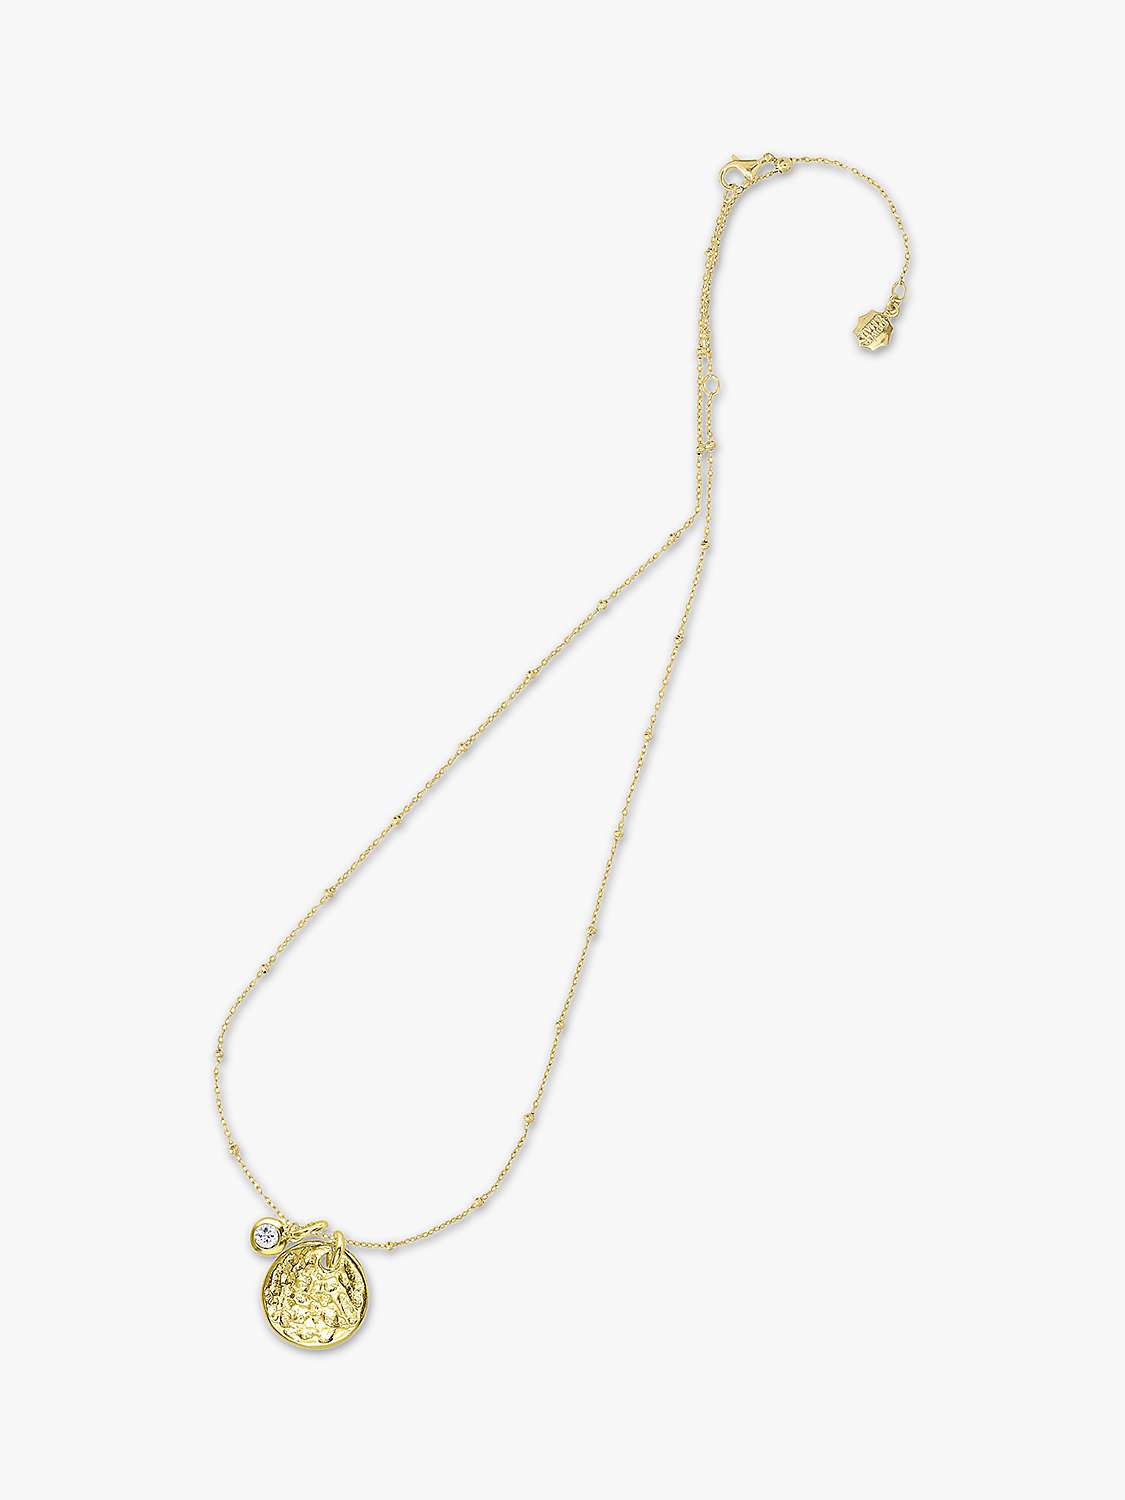 Buy Dower & Hall Textured Round Charm and Sapphire Twinkle Pendant Necklace Online at johnlewis.com